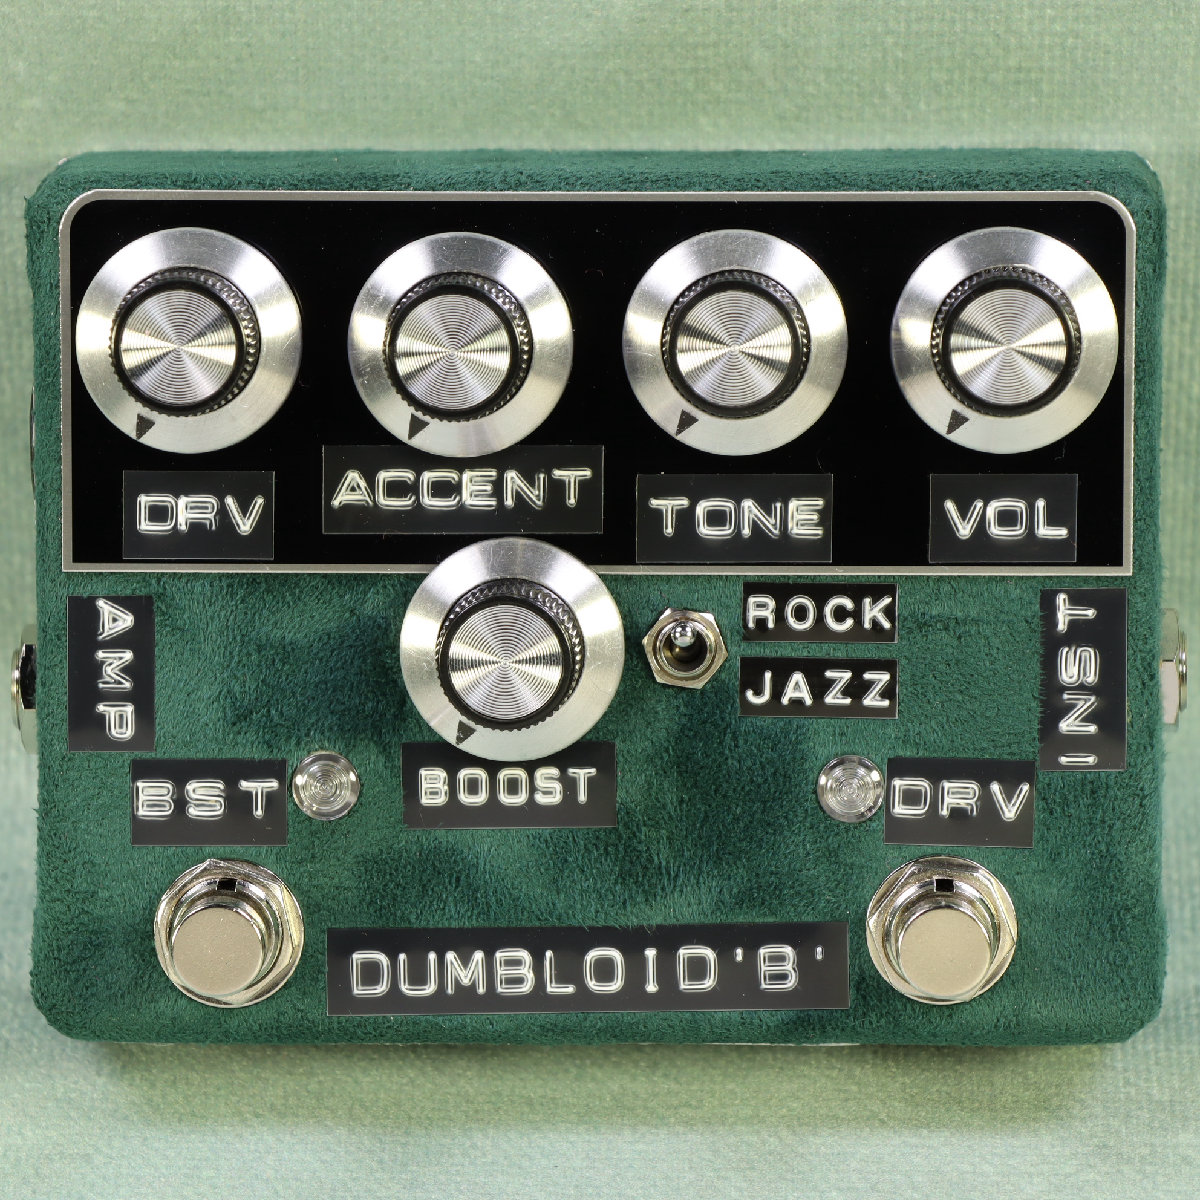 Shins Music / Dumbloid B Boost Special Green Suede Black Panel with  JAZZ/ROCK SW シンズミュージック オーバードライブ